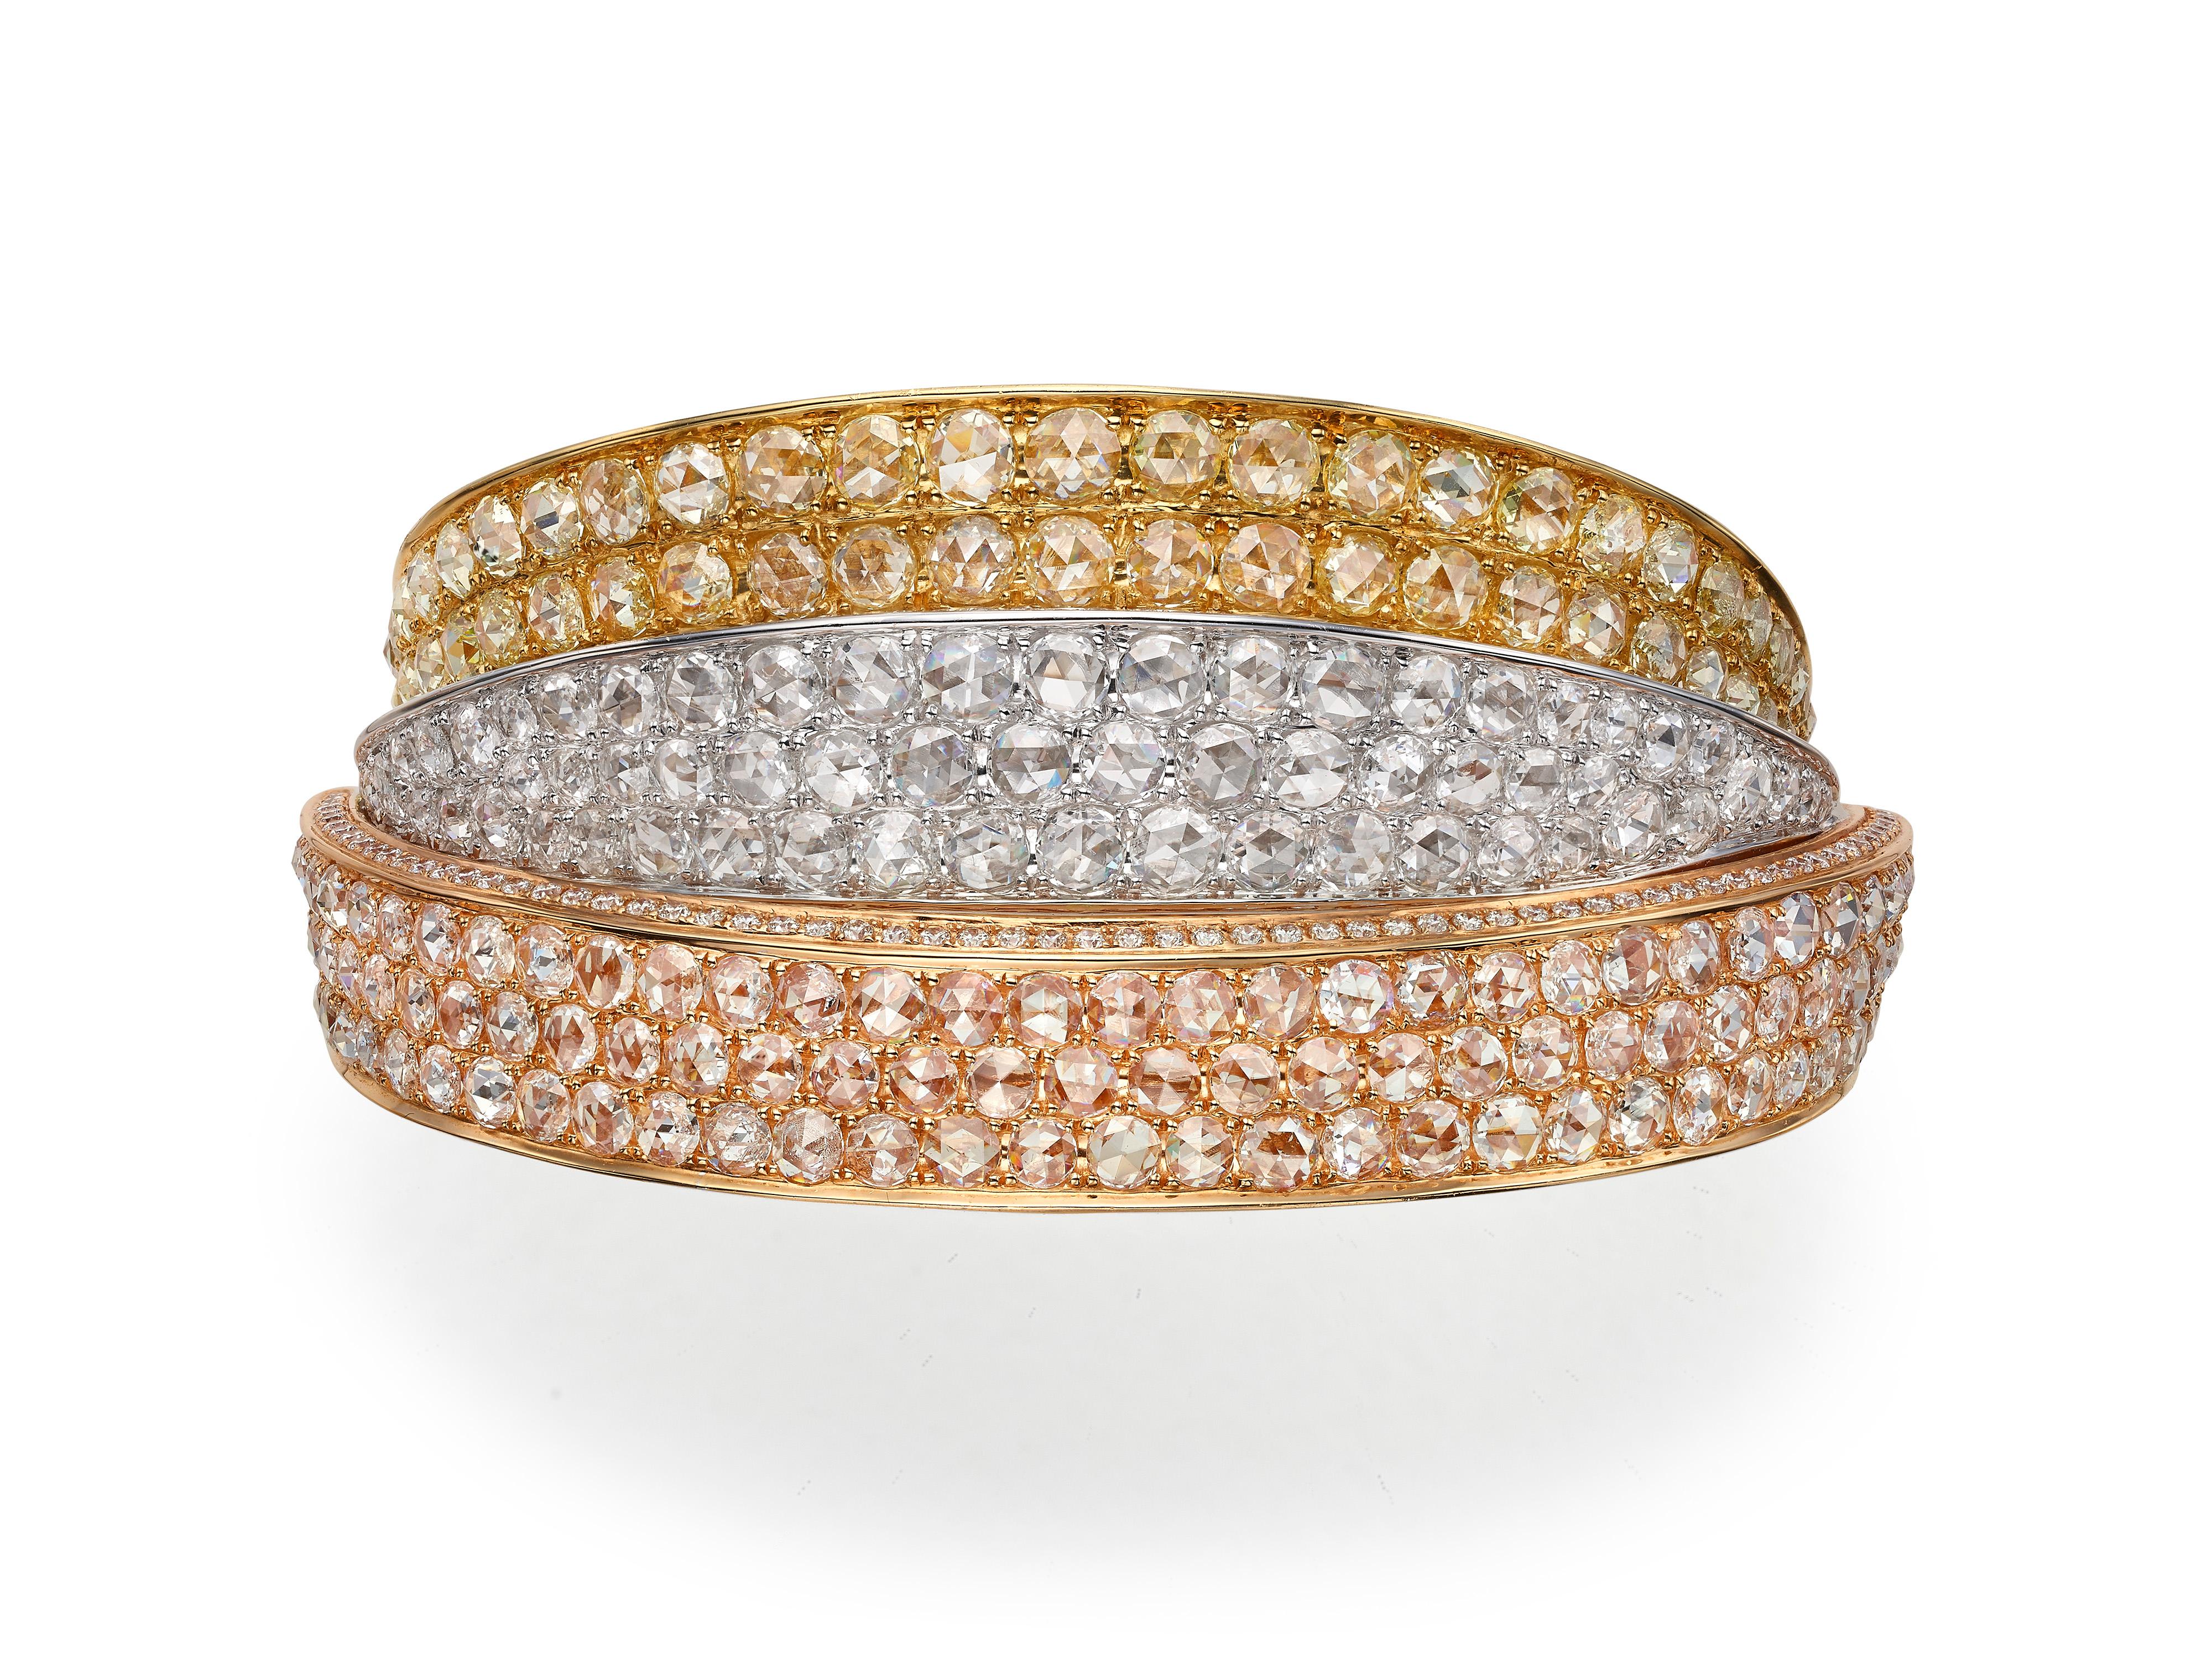 A statement cuff bangle composed of three interlocking tricolor gold panels in white, yellow and rose gold (all 18K) and pave-set with 18.30 rose cut and round white and yellow diamonds.  

Composition: 
18K White, Yellow and Rose Gold
161 Rose Cut